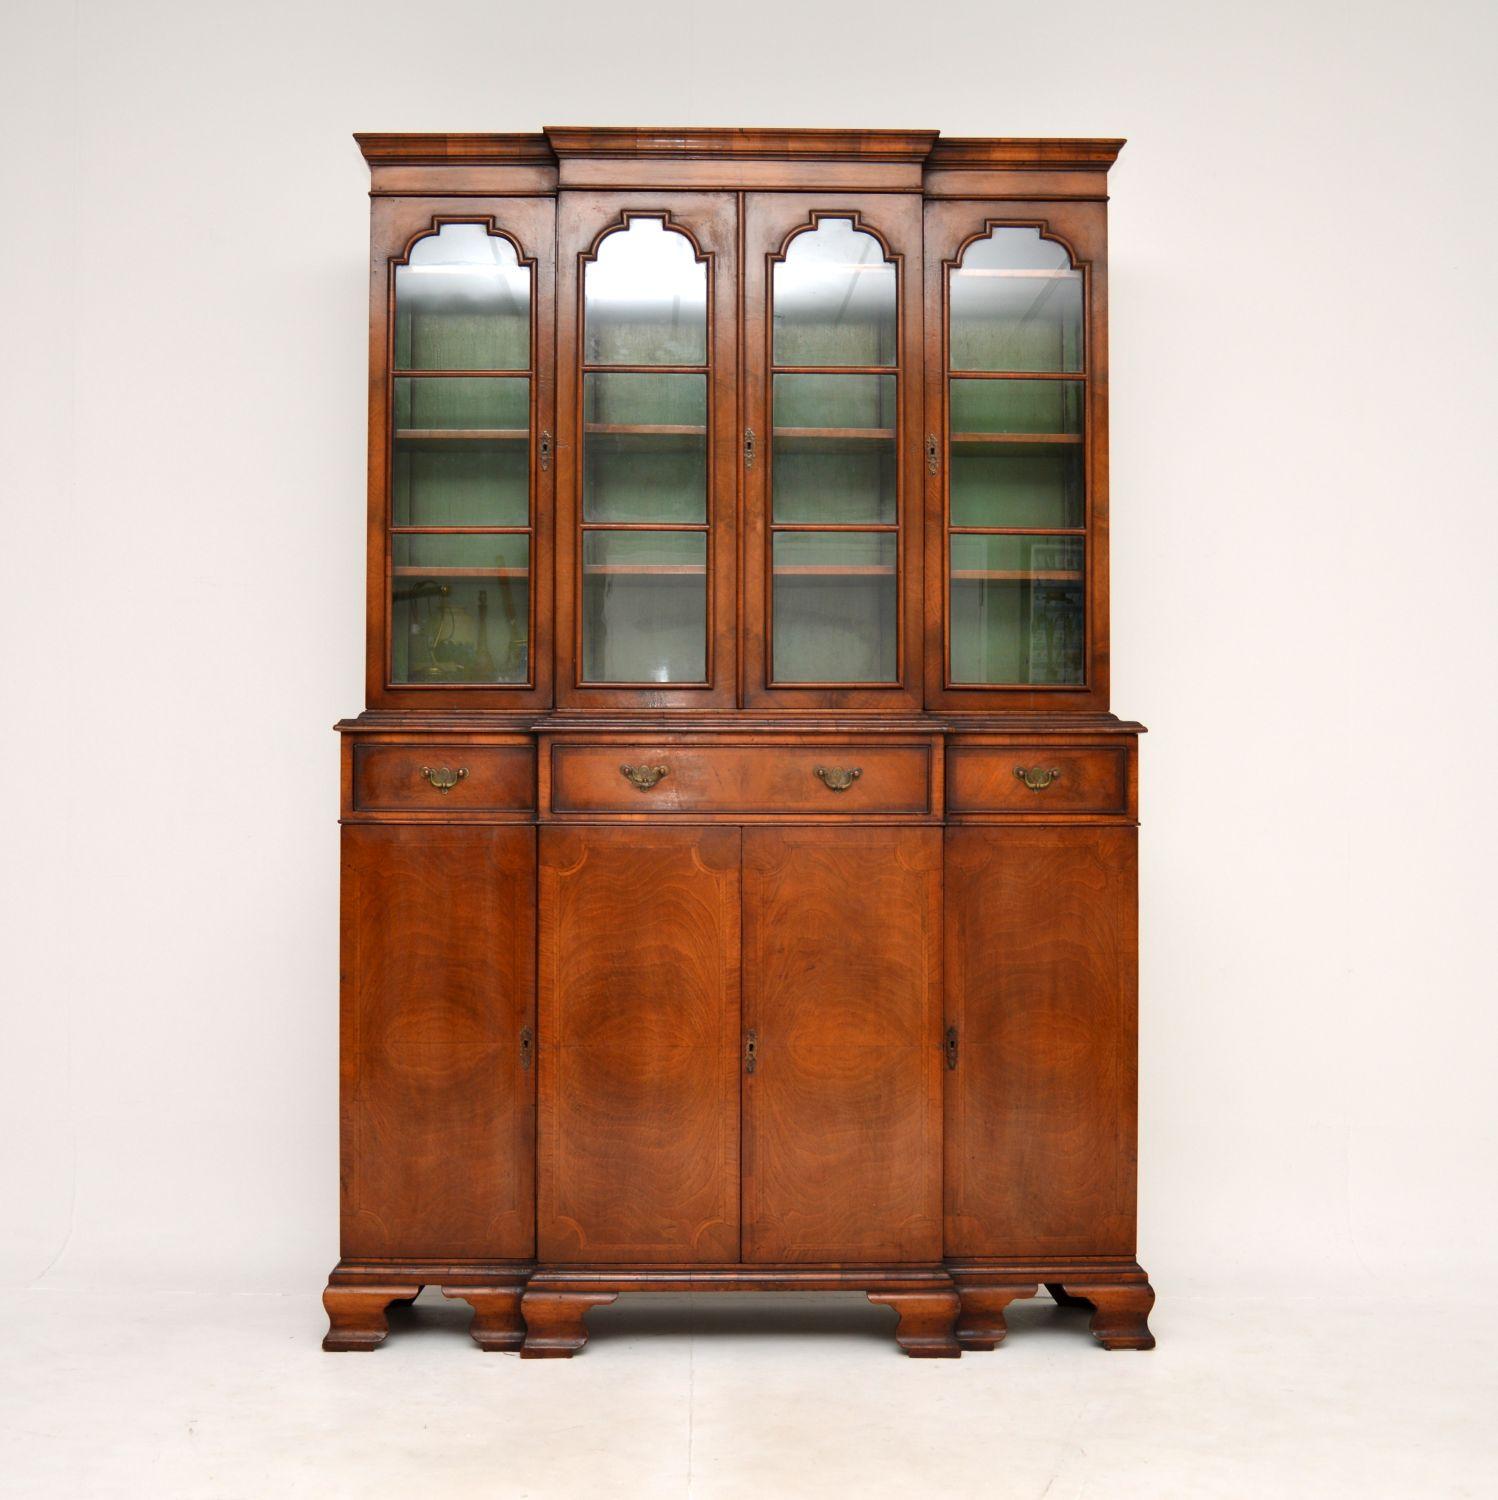 A superb antique inlaid walnut breakfront bookcase. This was made in England, it dates from around the 1900-1910 period.

It is of outstanding quality and is a great size. It is large and has plenty of storage space, it is also quite slim and not